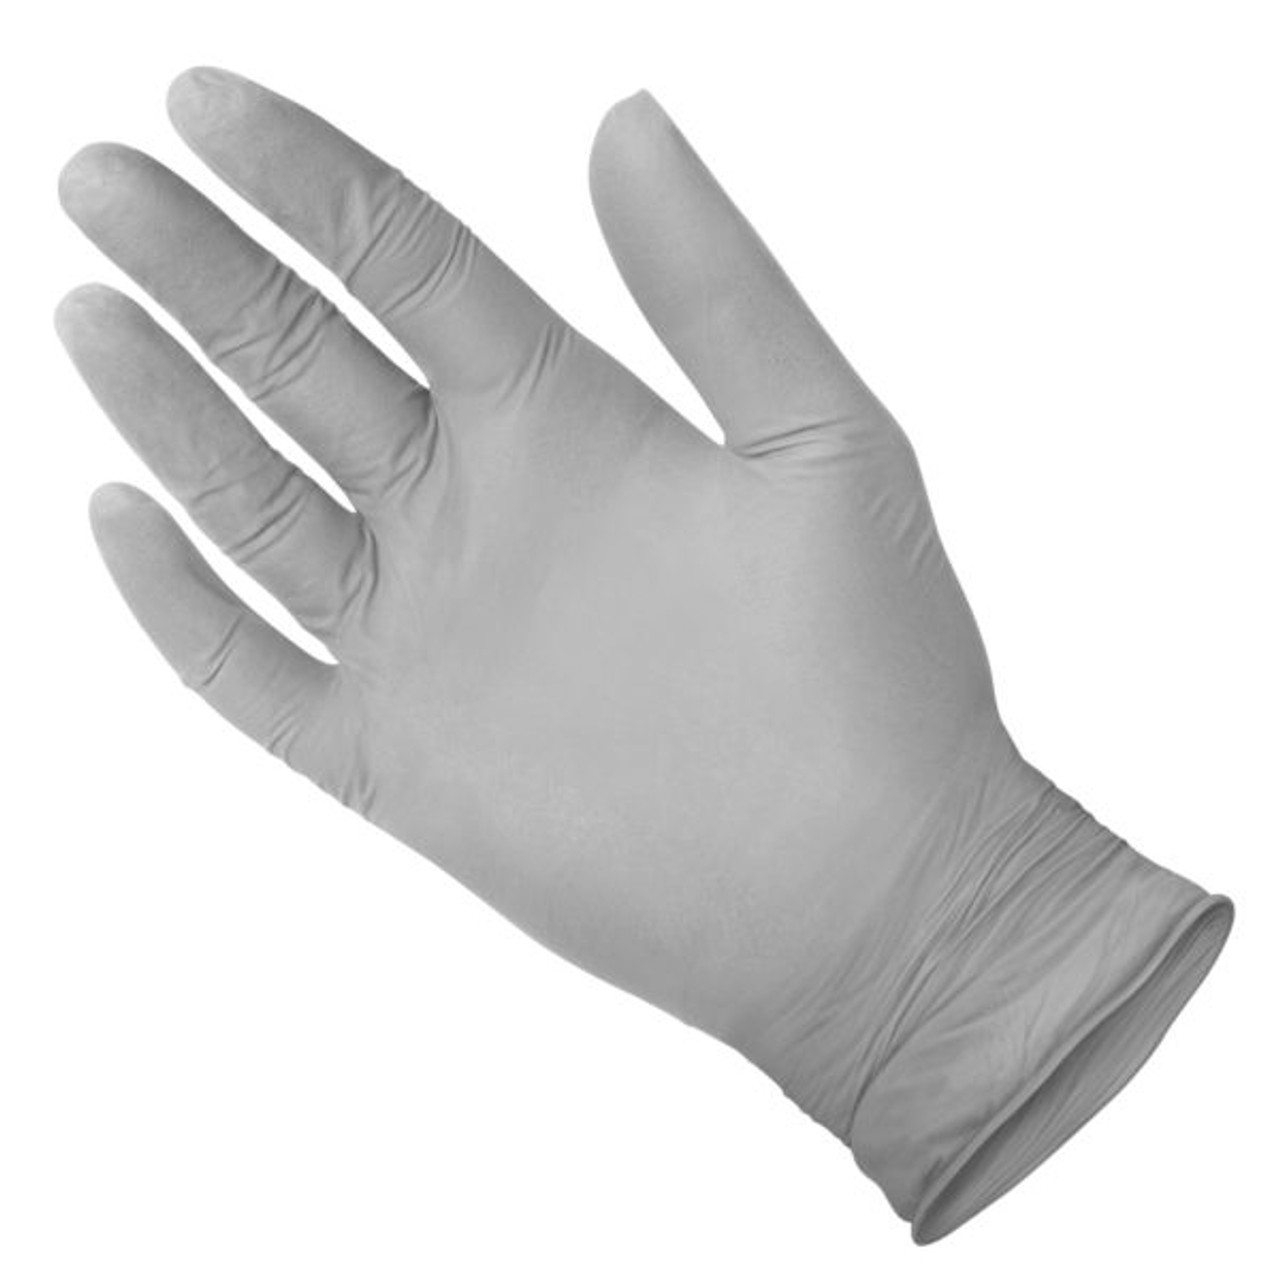 Medgluv Oysterskin Nitrile Exam Glove, Textured Finger, 3.2mil, Grey, Small 250/bx, 10/cs